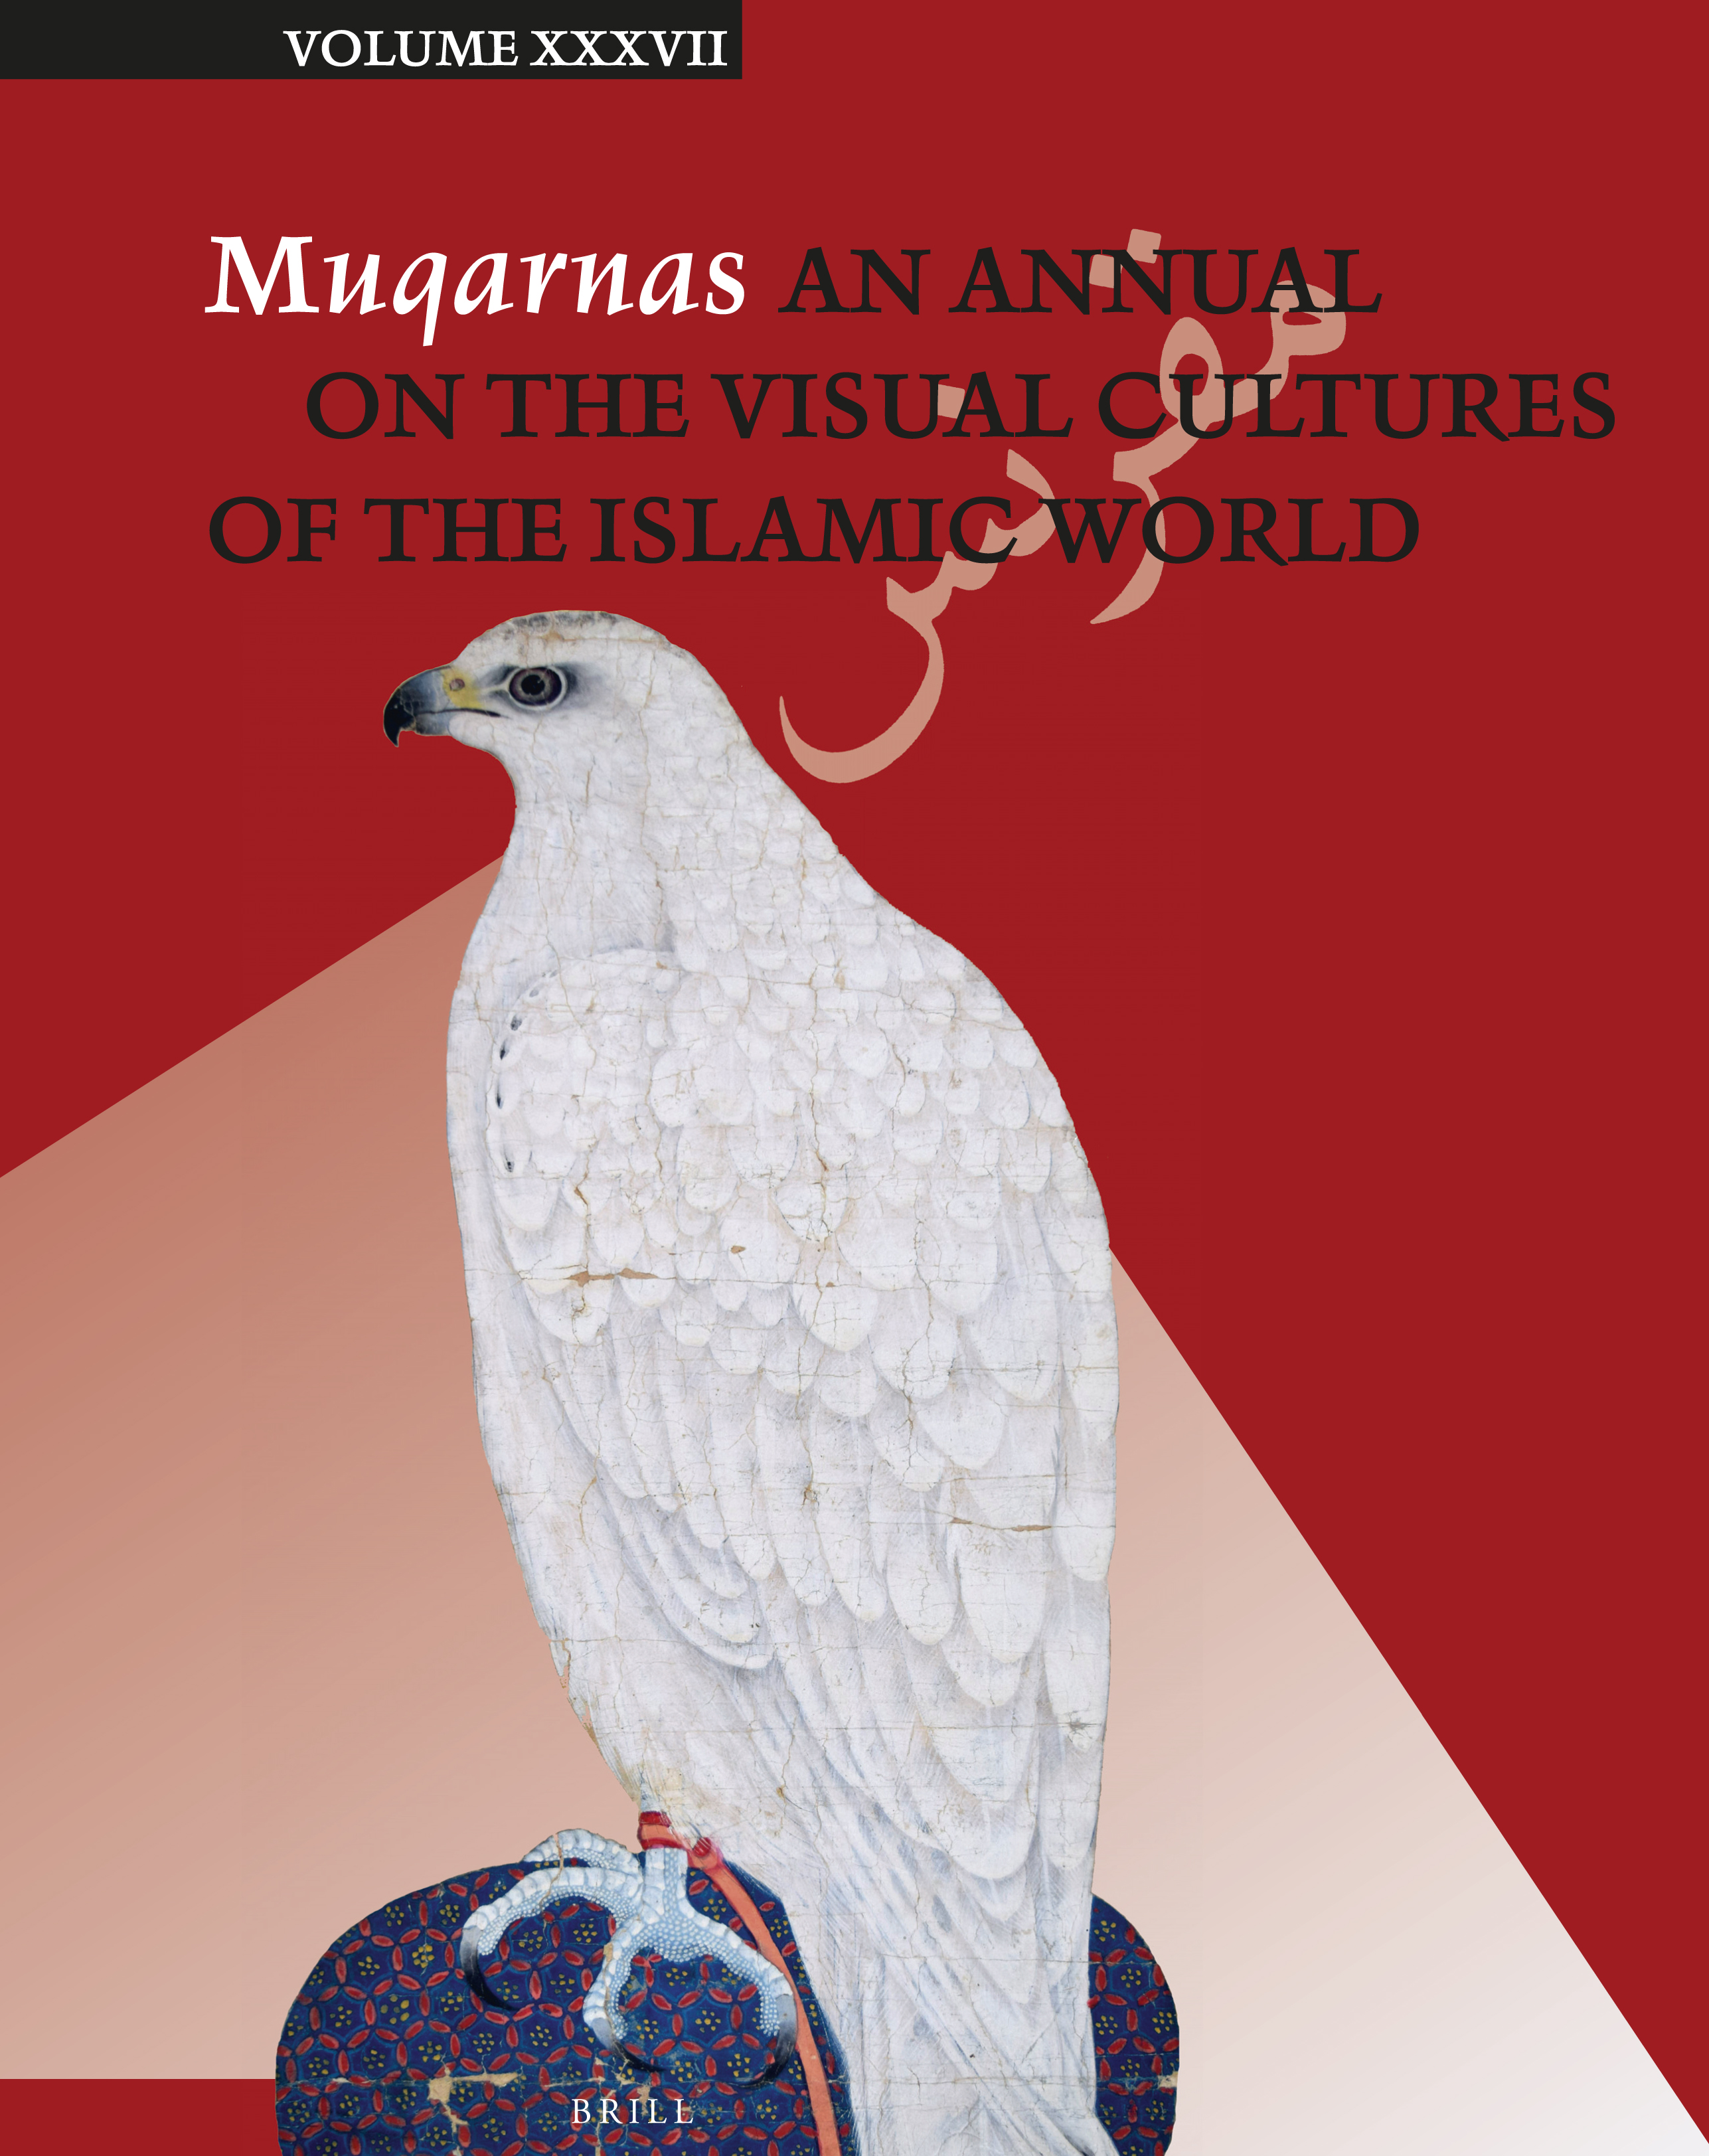 Muqarnas XXXVII: An Annual on the Visual Cultures of the Islamic World